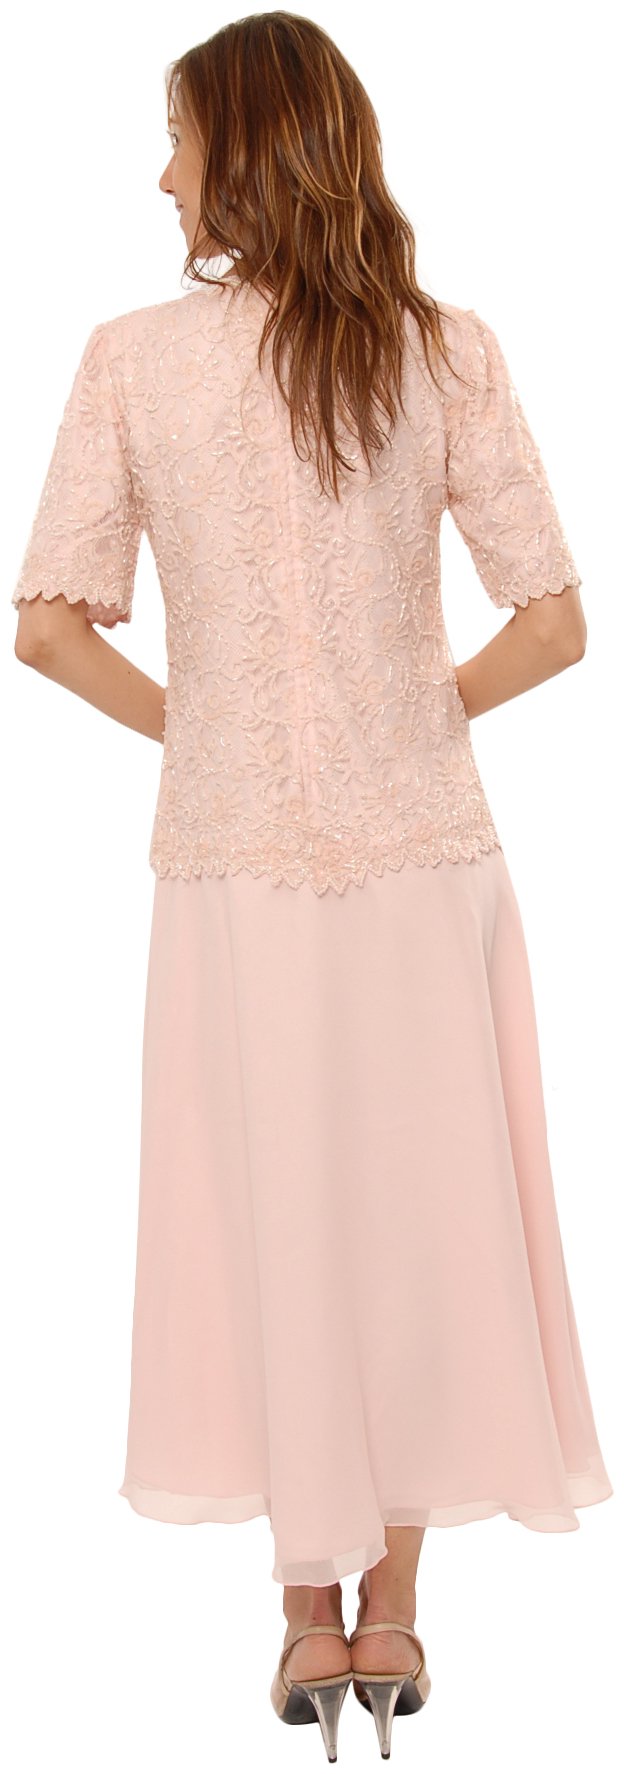 Mother of The Bride Great Tea Length Dress in Pink Plus & Missy Sizes